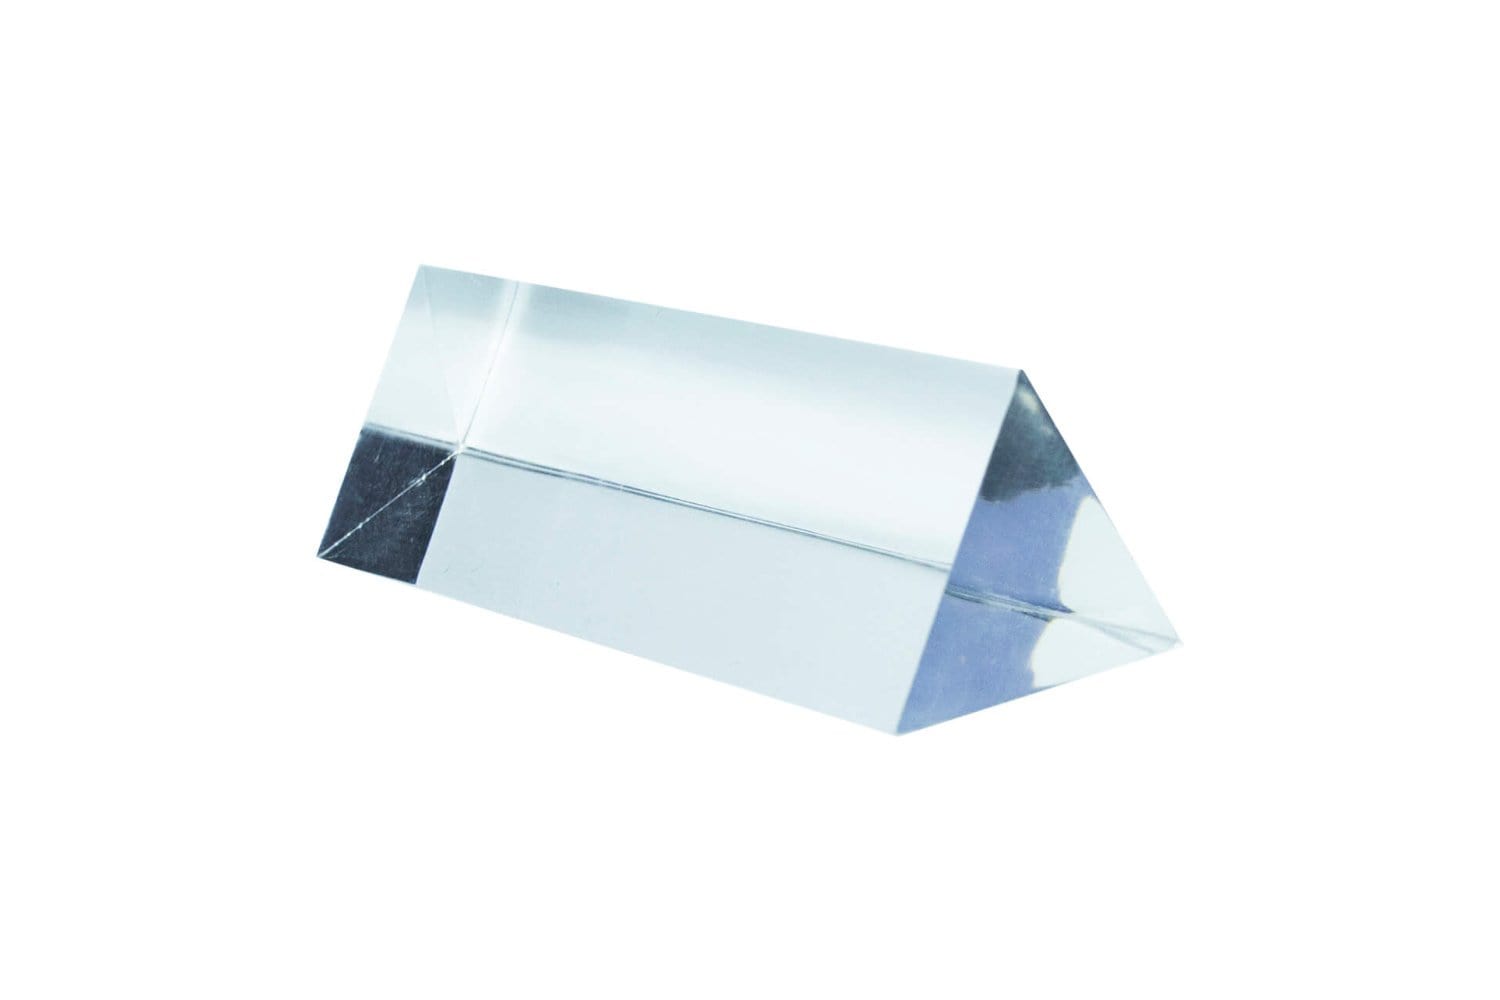 25mm Width 75mm Length Bundle of 5 American Educational Glass Equilateral Prism 